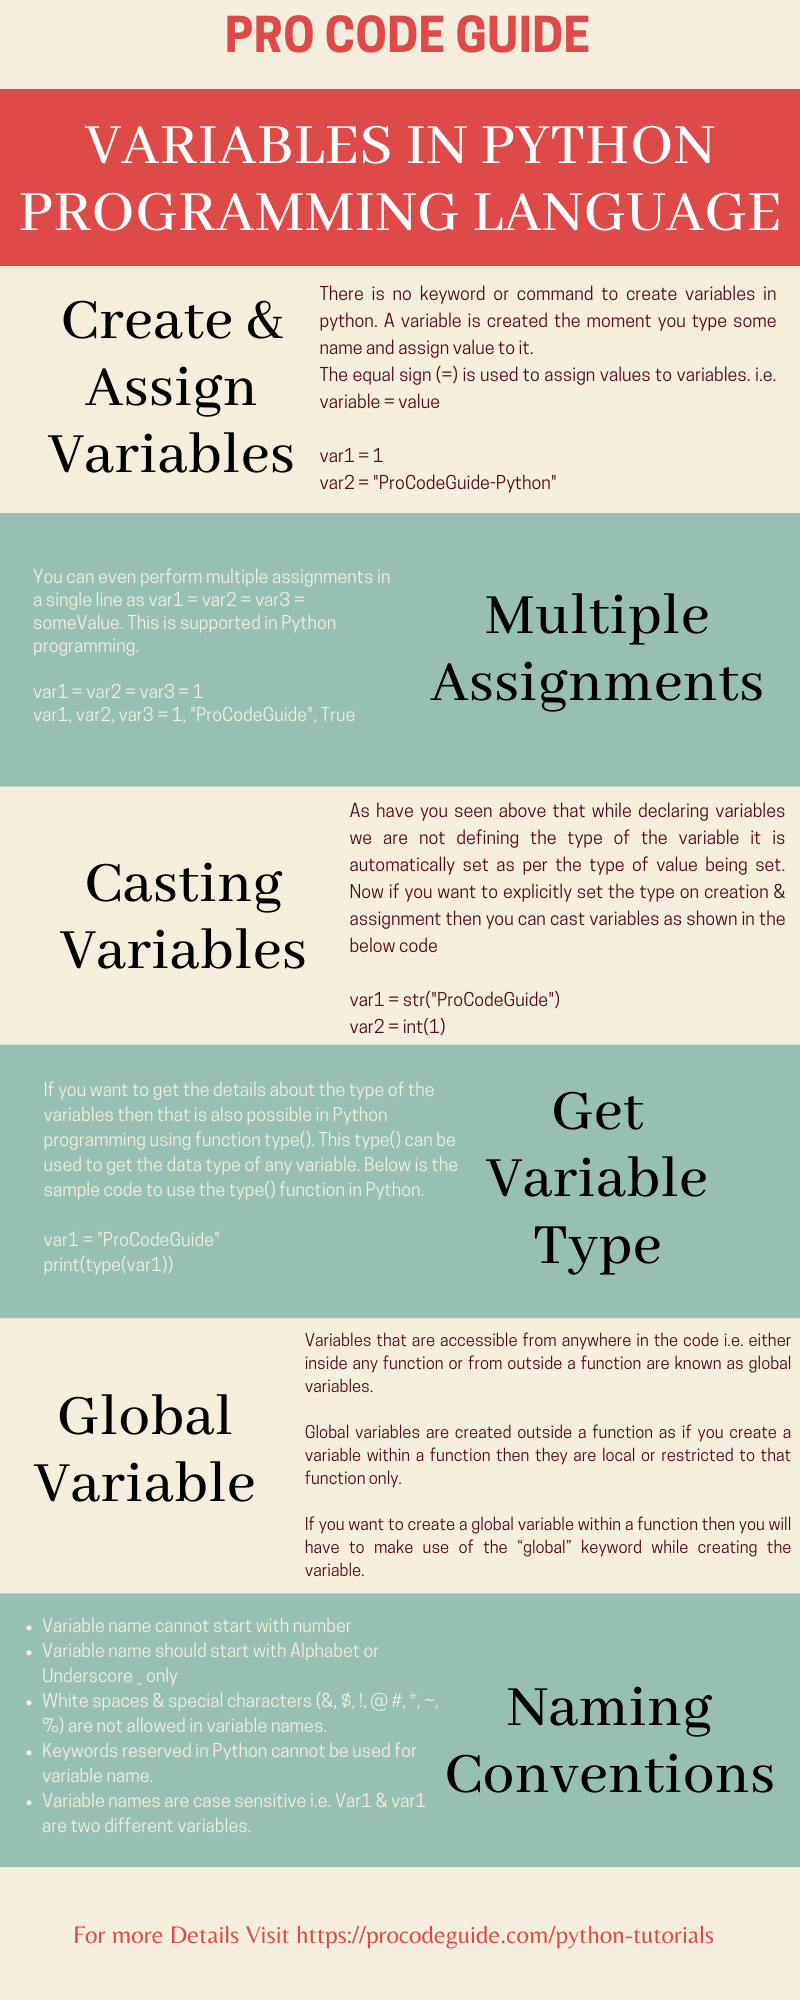 Variables in Python Programming - Infographic